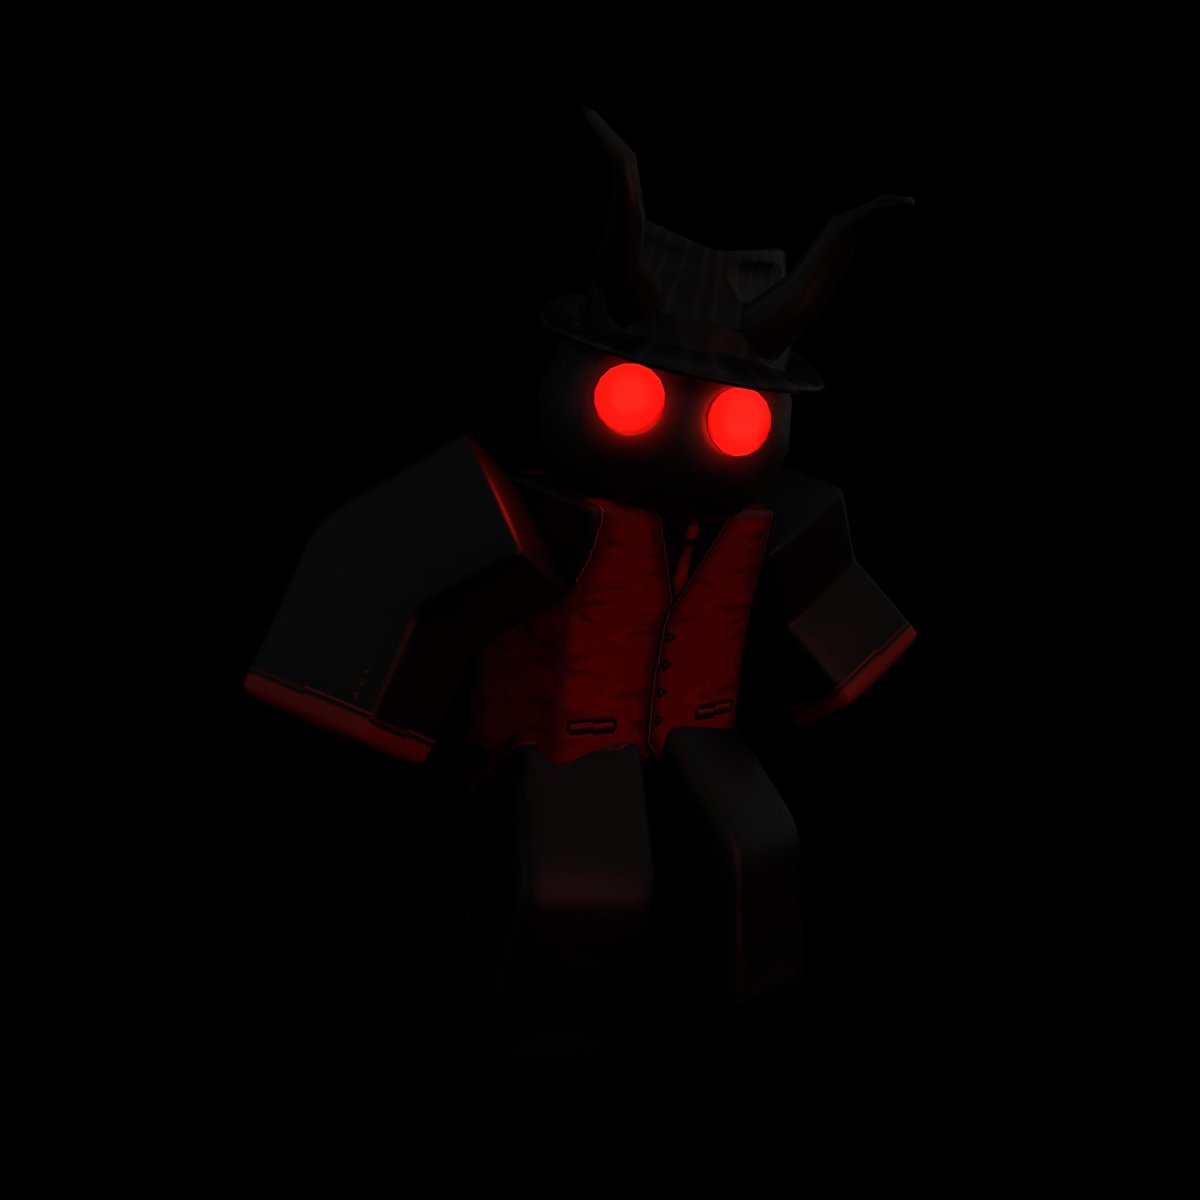 How To Get The Dark Reaper Hat In Roblox